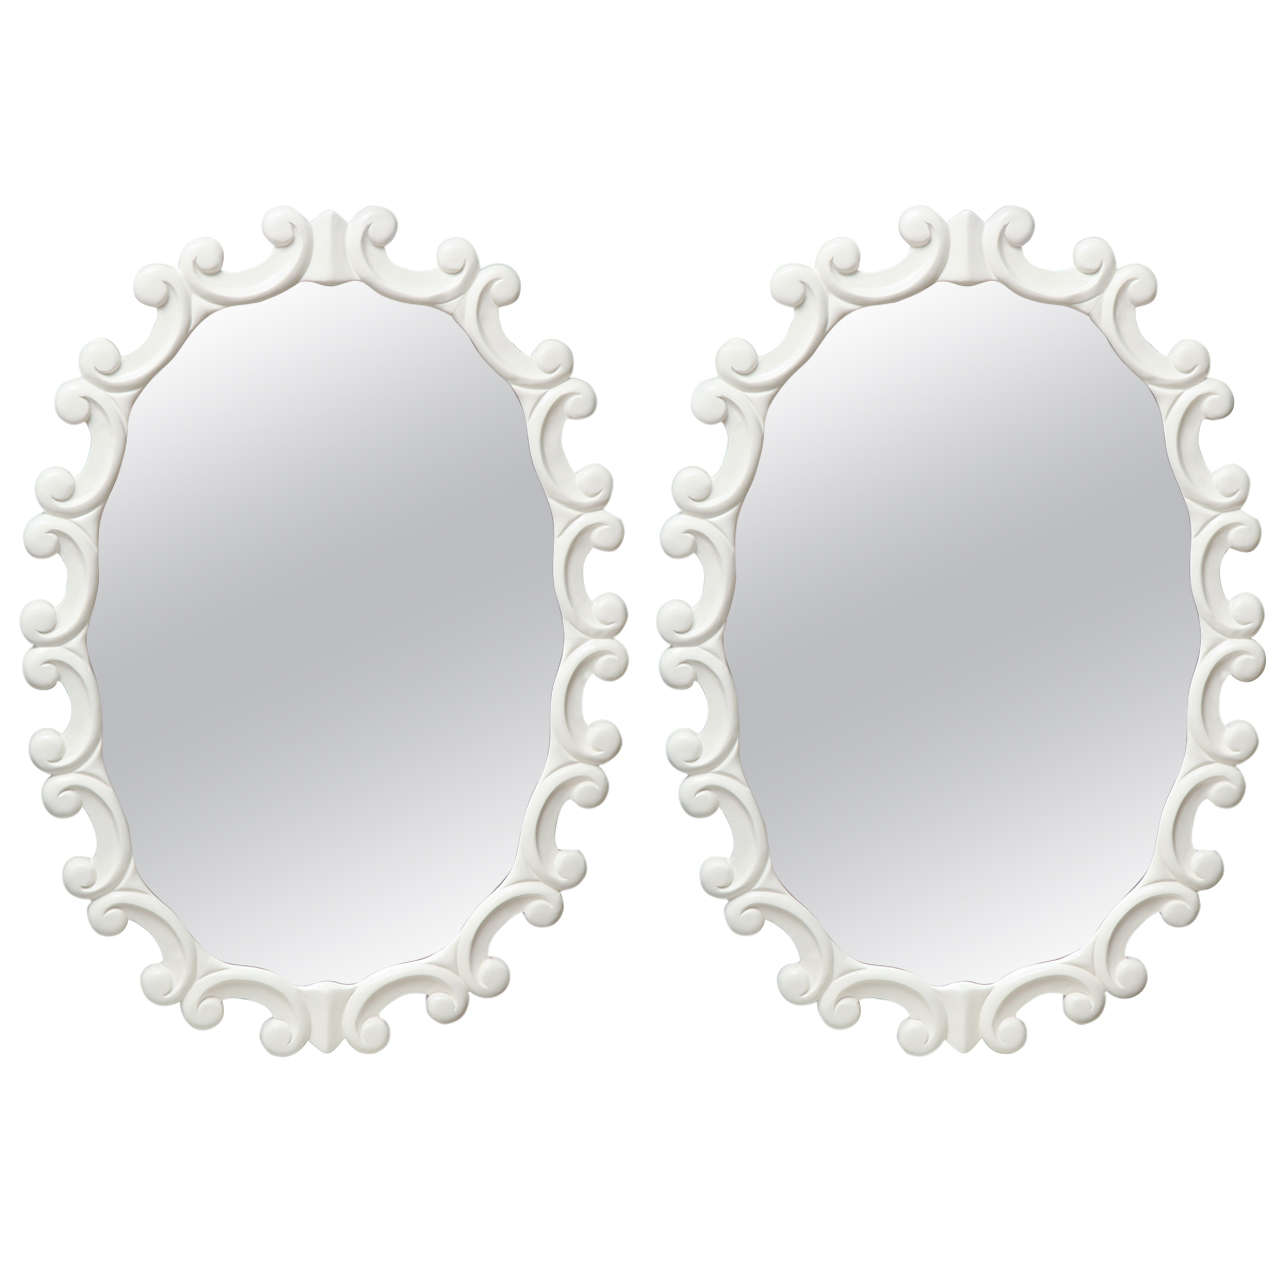 Pair of White Lacquered Faux Regency Oval Mirrors, Circa 1940